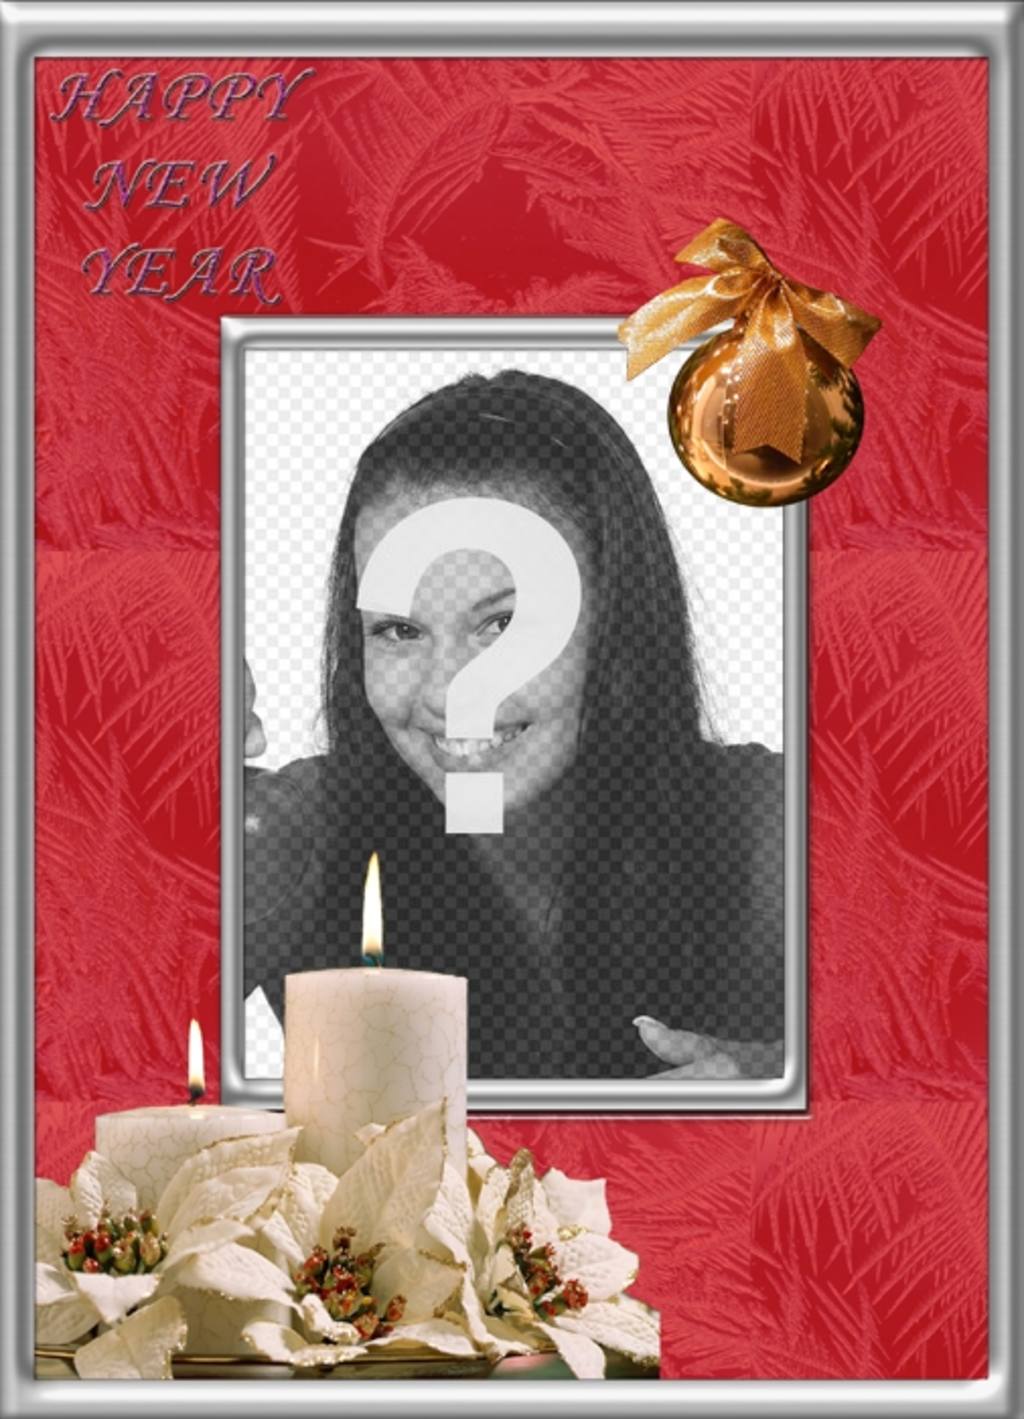 Online photo frame for photos to celebrate a Happy New Year ..